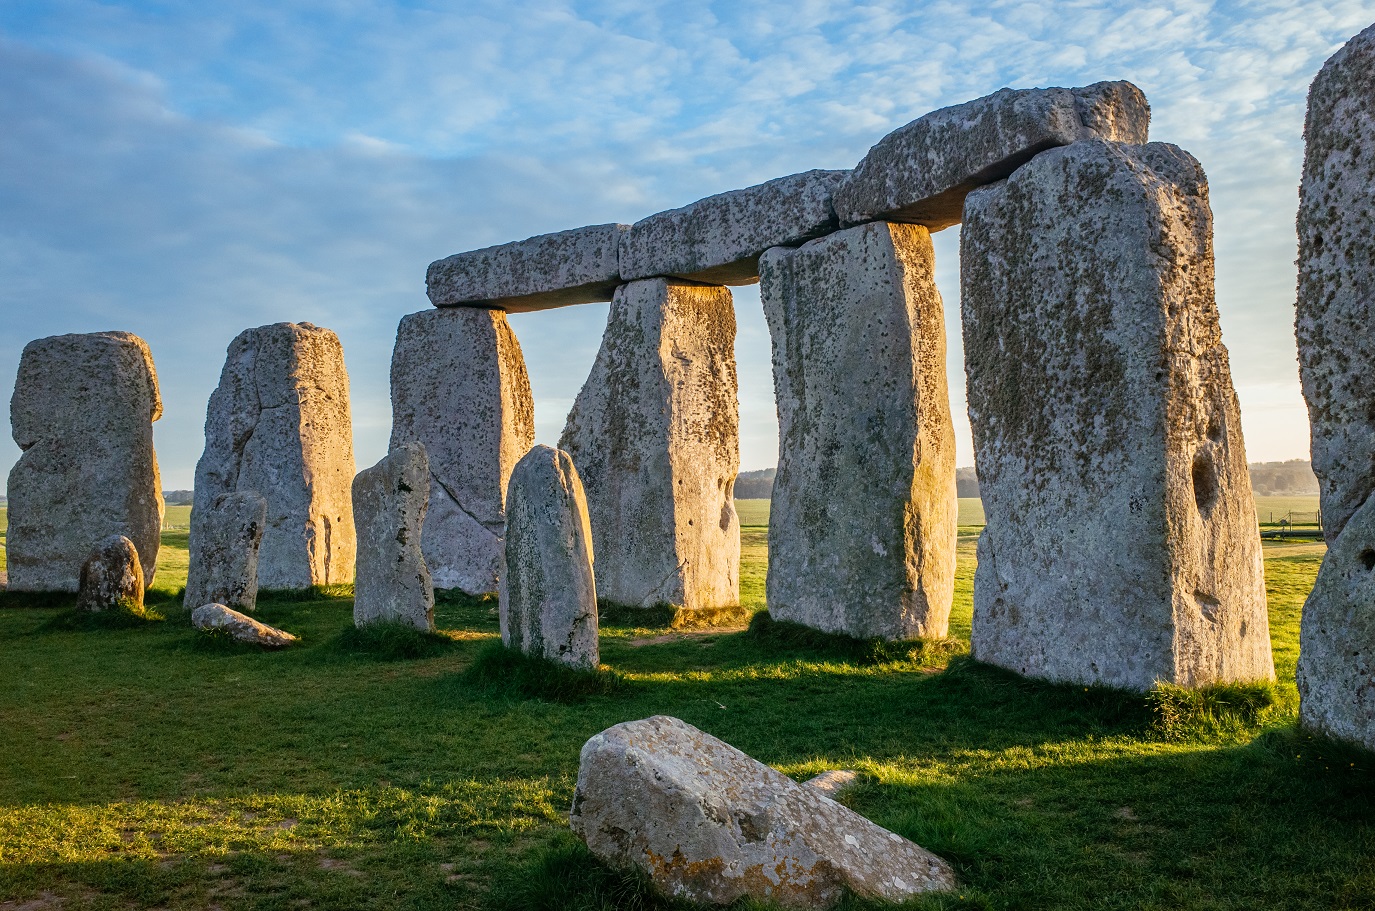 <p>But what's so mysterious about Stonehenge? Well, the large sarsen stones likely came from the West Woods in Wiltshire, while the smaller stones came from far away—likely southwest Wales, which is over 150 miles from the site.</p>